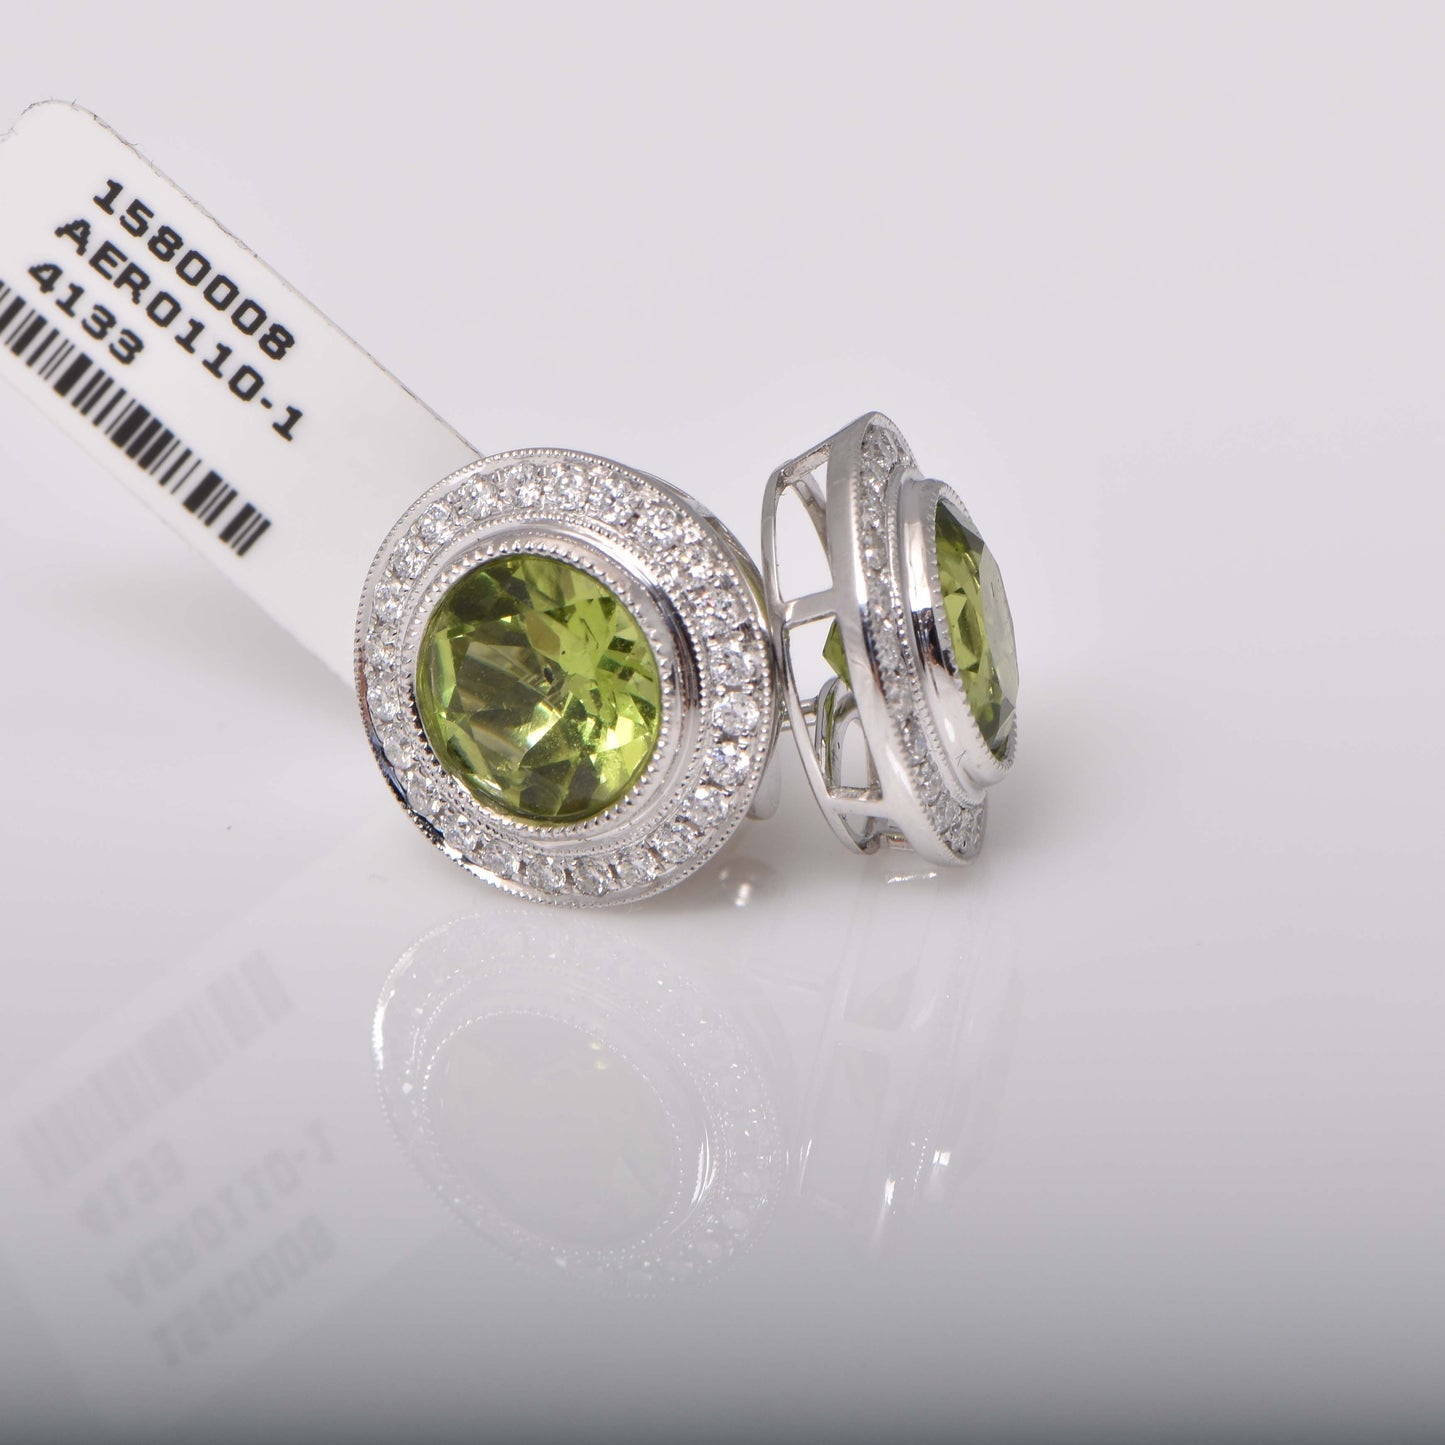 4.73ct Peridot and Diamond Earrings in 18ct White Gold